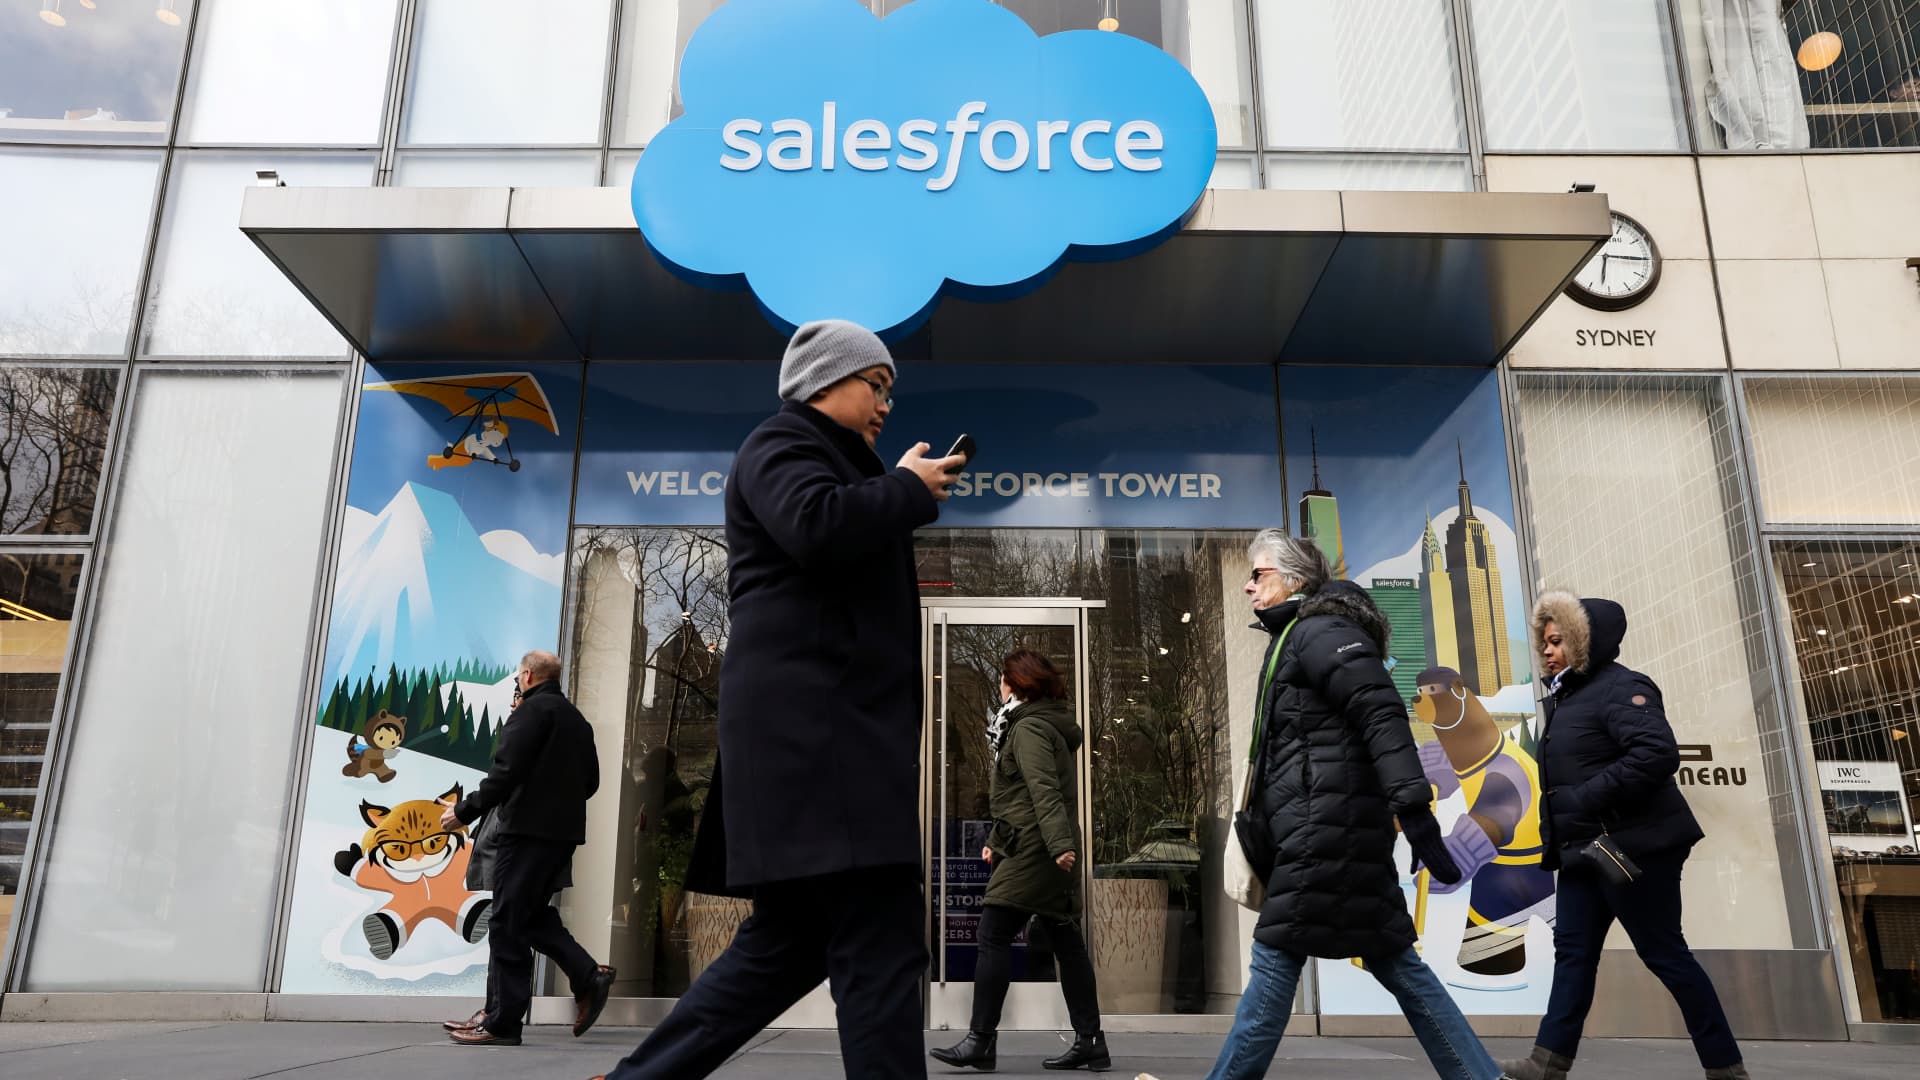 Salesforce drops after reports it's in talks to acquire Informatica - CNBC